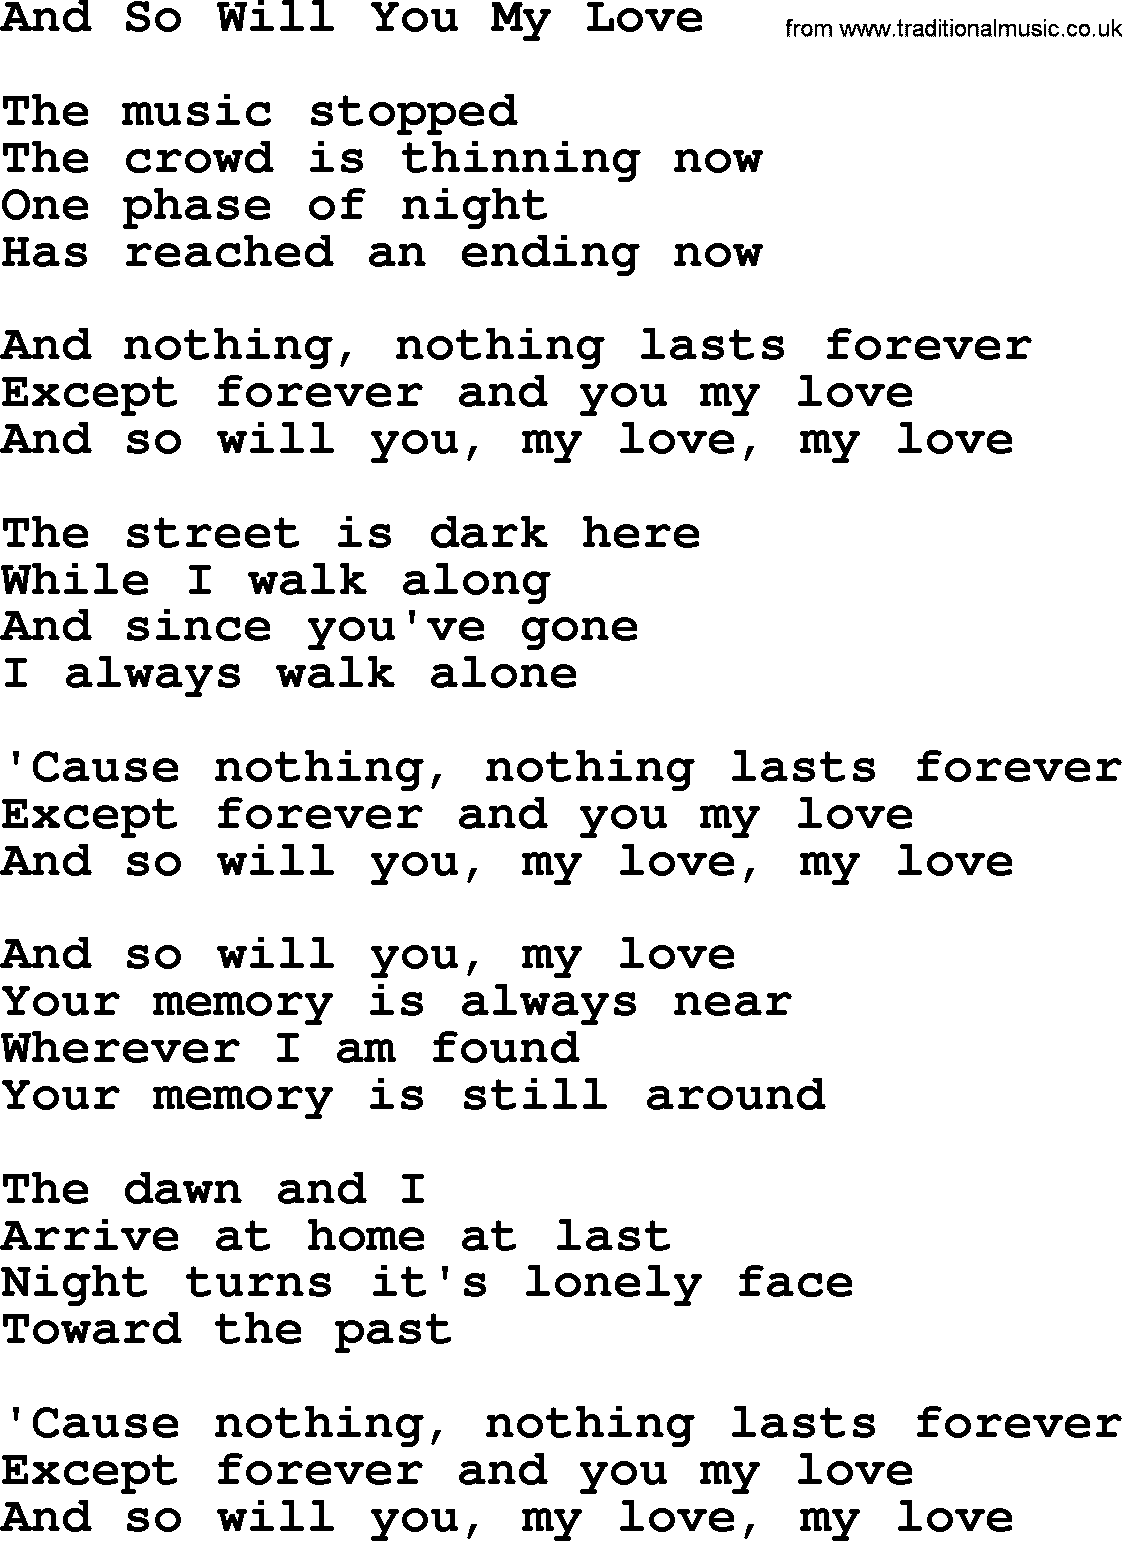 Willie Nelson song: And So Will You My Love lyrics